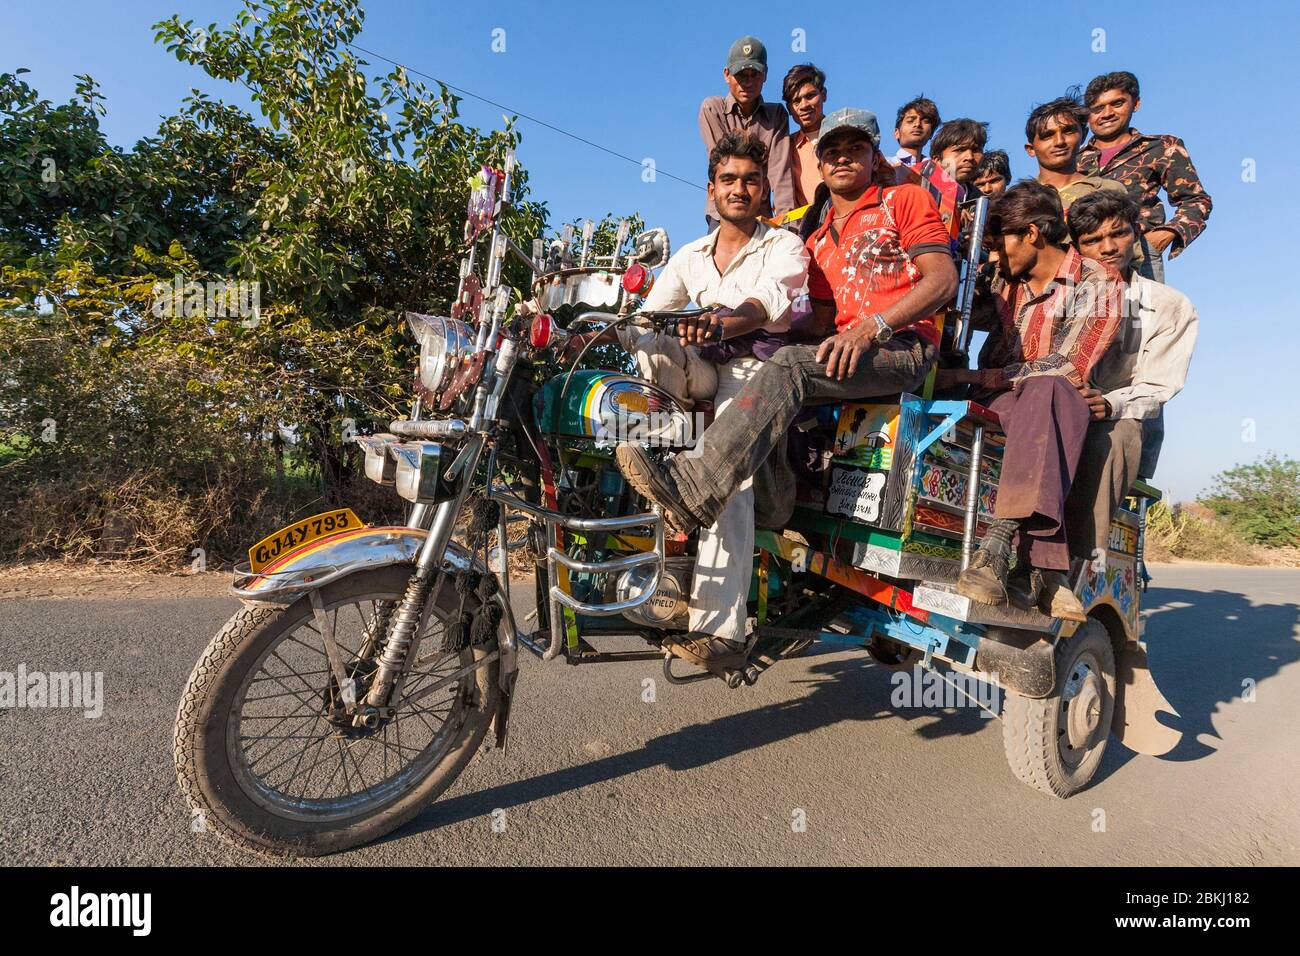 India, Gujarat State, near Bhavnagar, Alang shipyards, workers returning from work on an overloaded motorcycle taxi Stock Photo